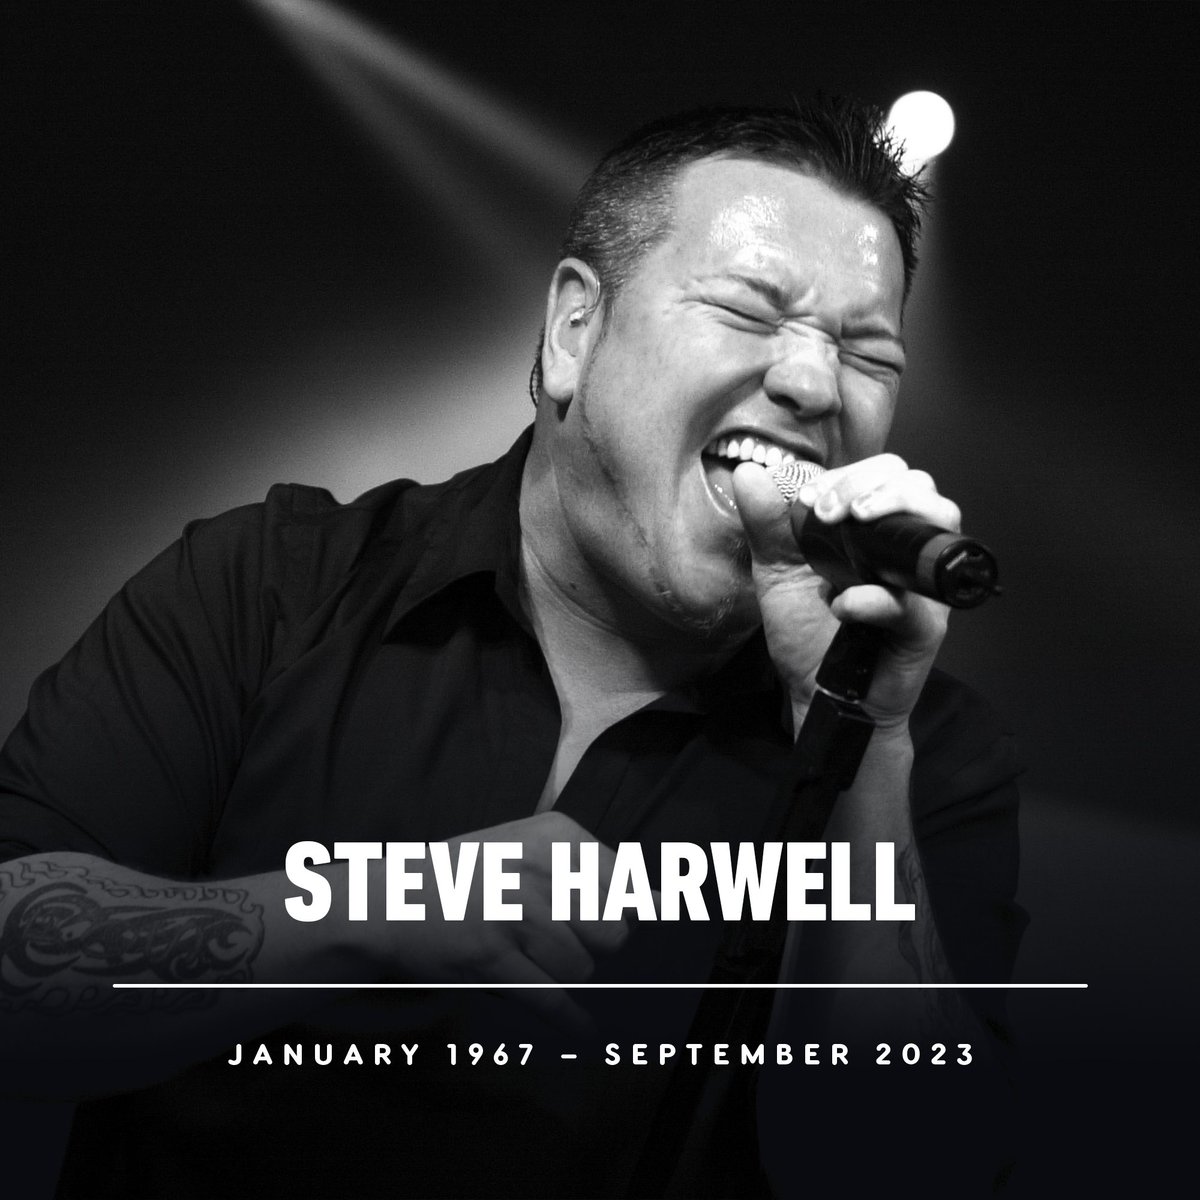 Steve Harwell, the frontman of Smash Mouth has died, aged 56.